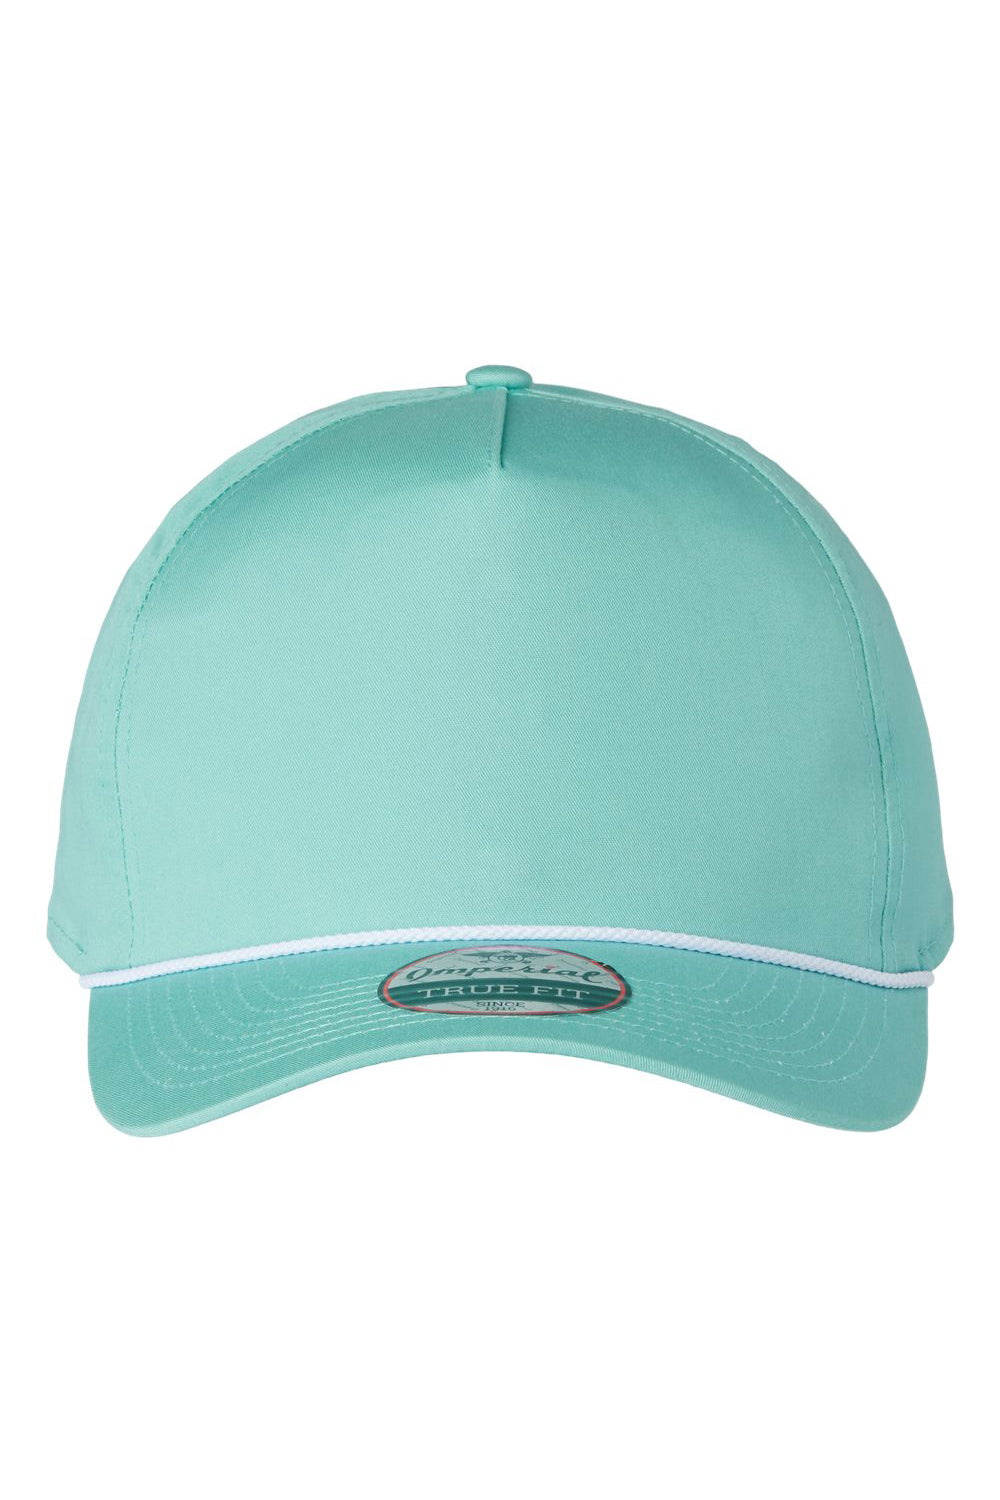 Imperial 5056 Mens The Barnes Hat Sea Green/White Flat Front